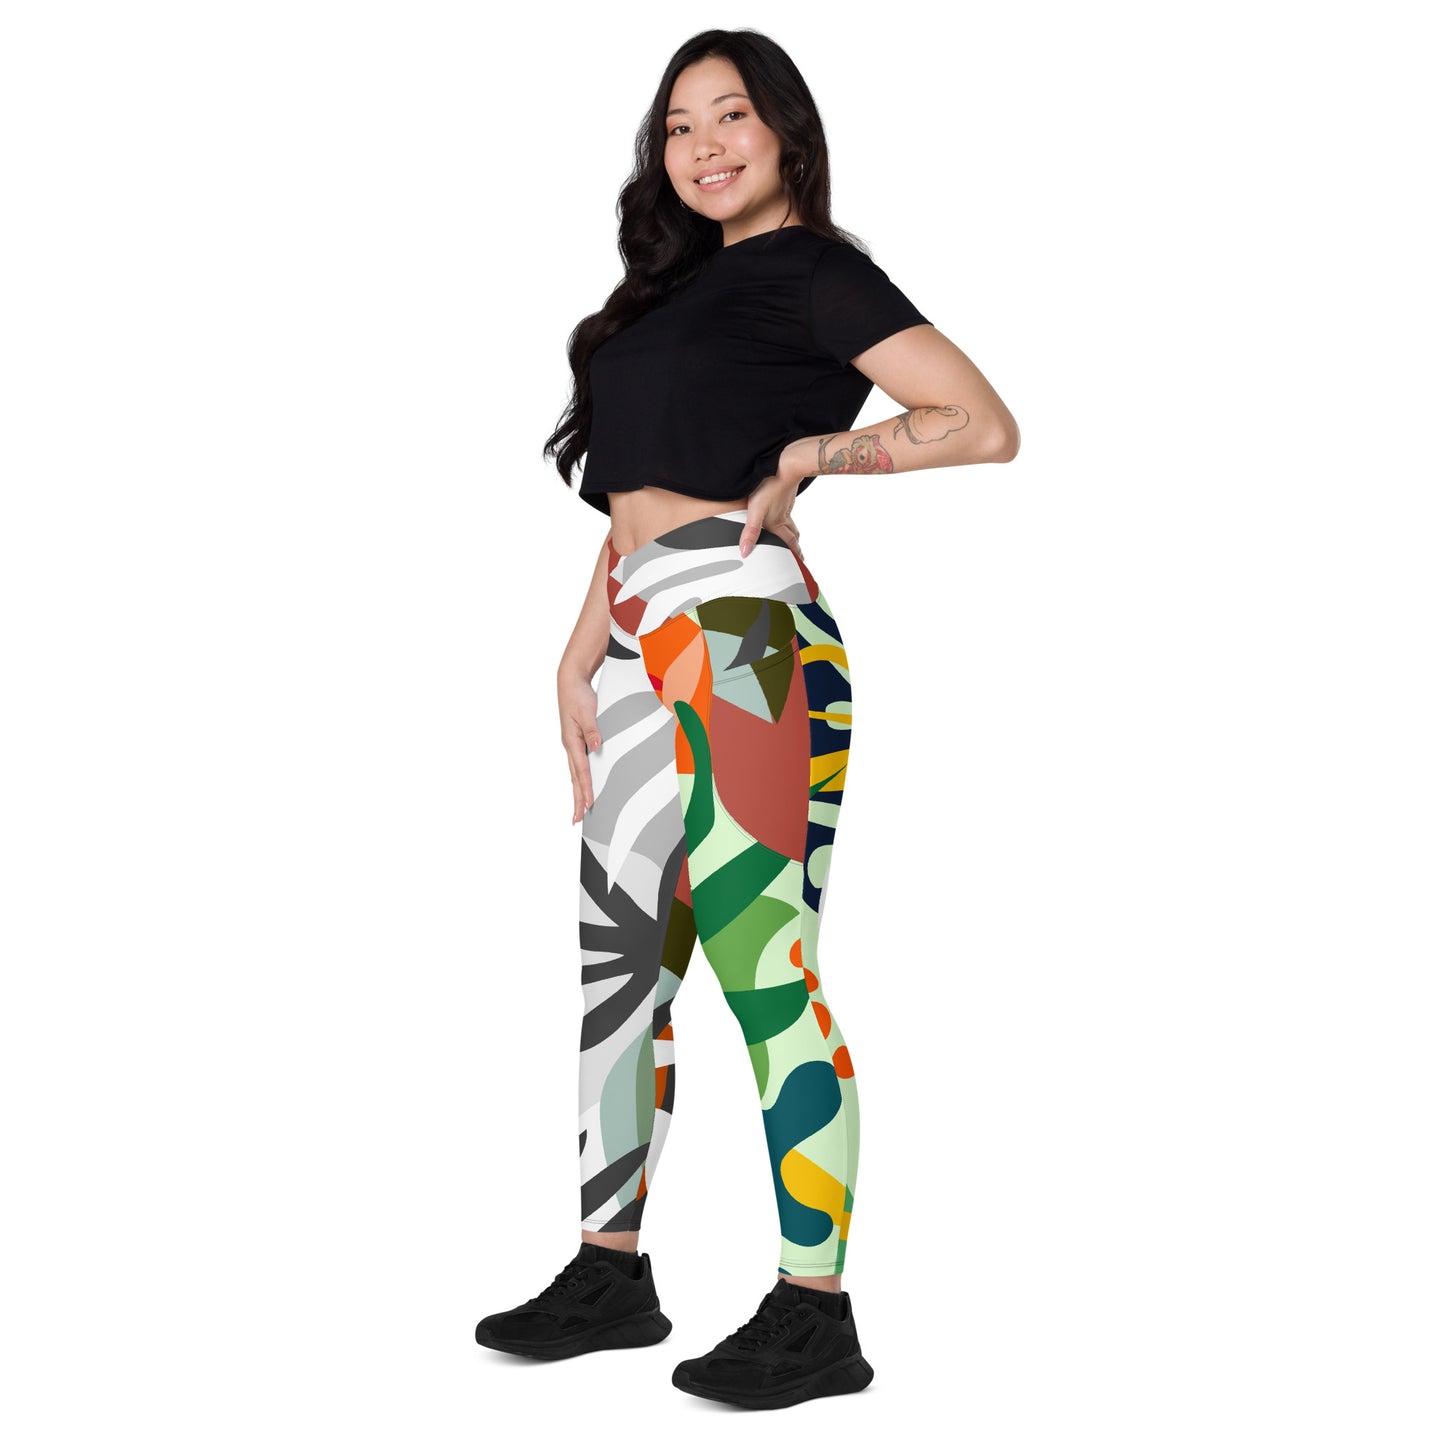 Floral High Waist Crossover leggings with pockets